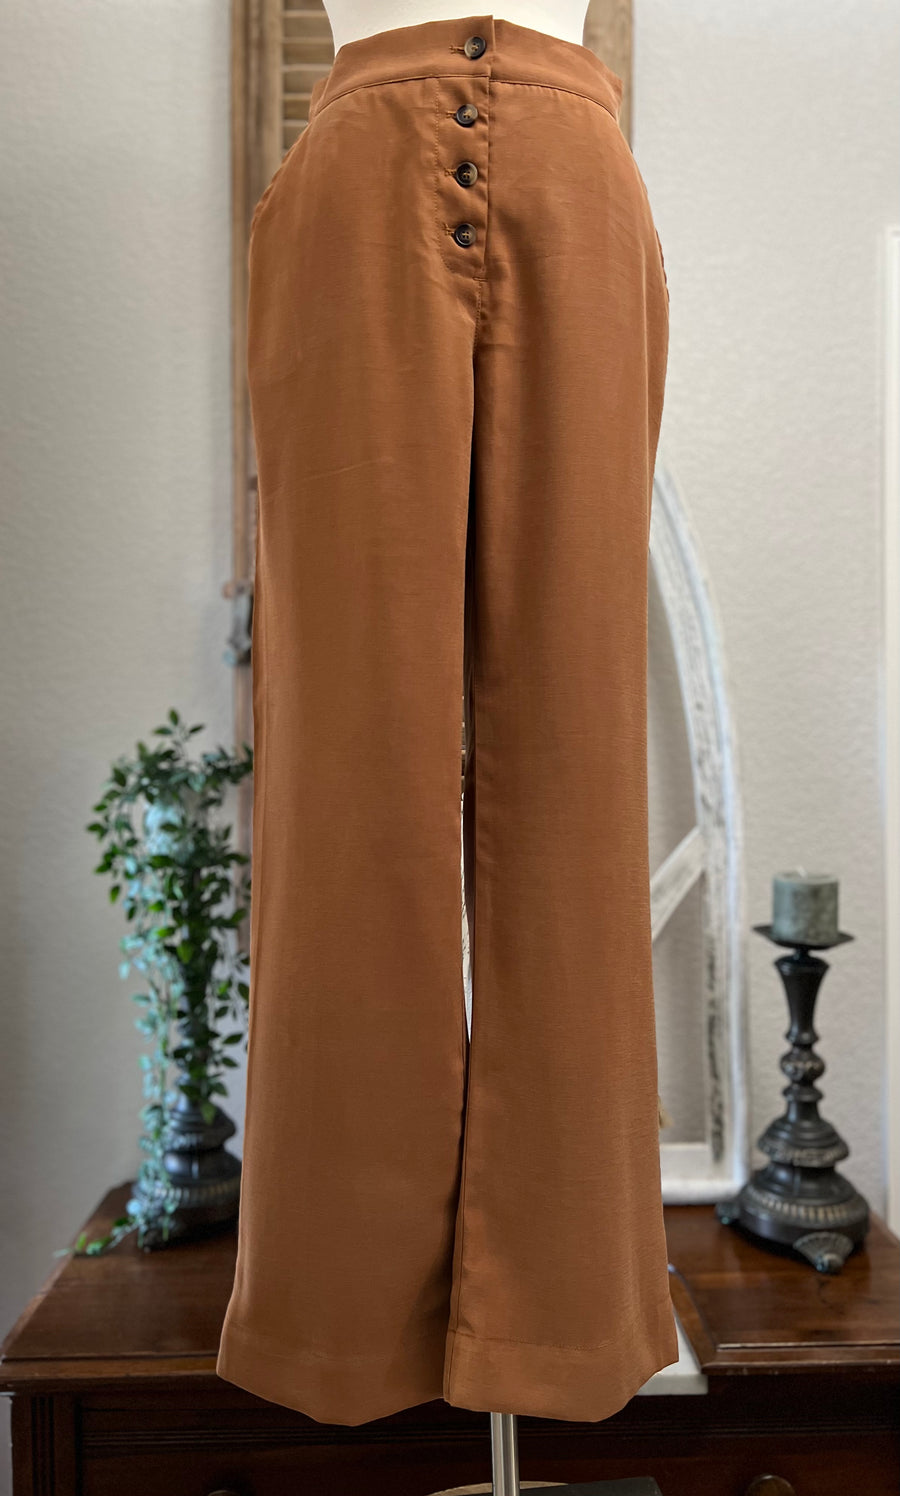 Sloane Button Front Dress Pant with Pockets